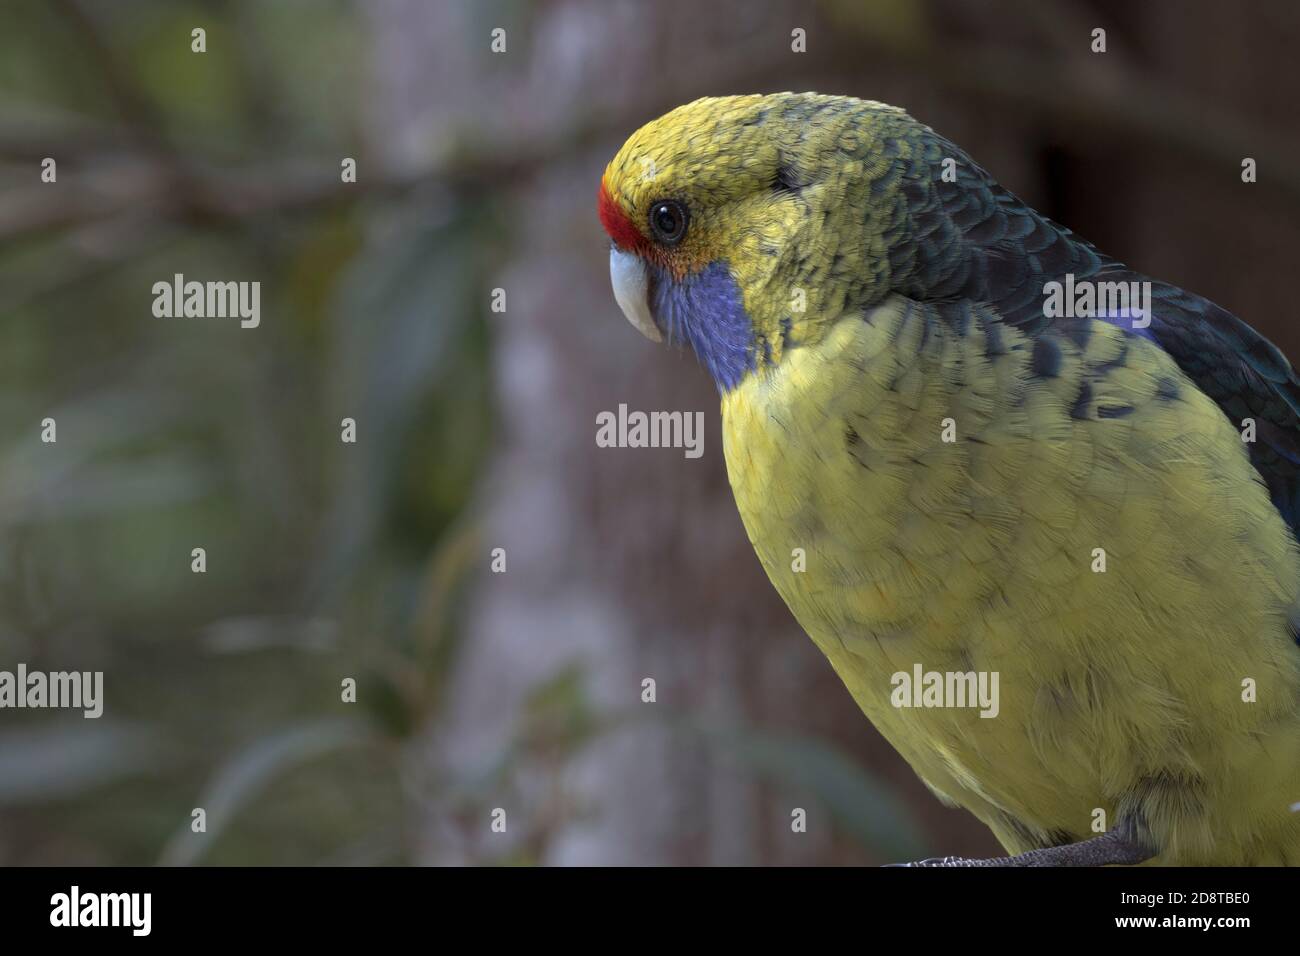 Tasmanian Rosella, a parrot native to Tasmania and Bass Strait islands, in portrait close up with copy space on left Stock Photo